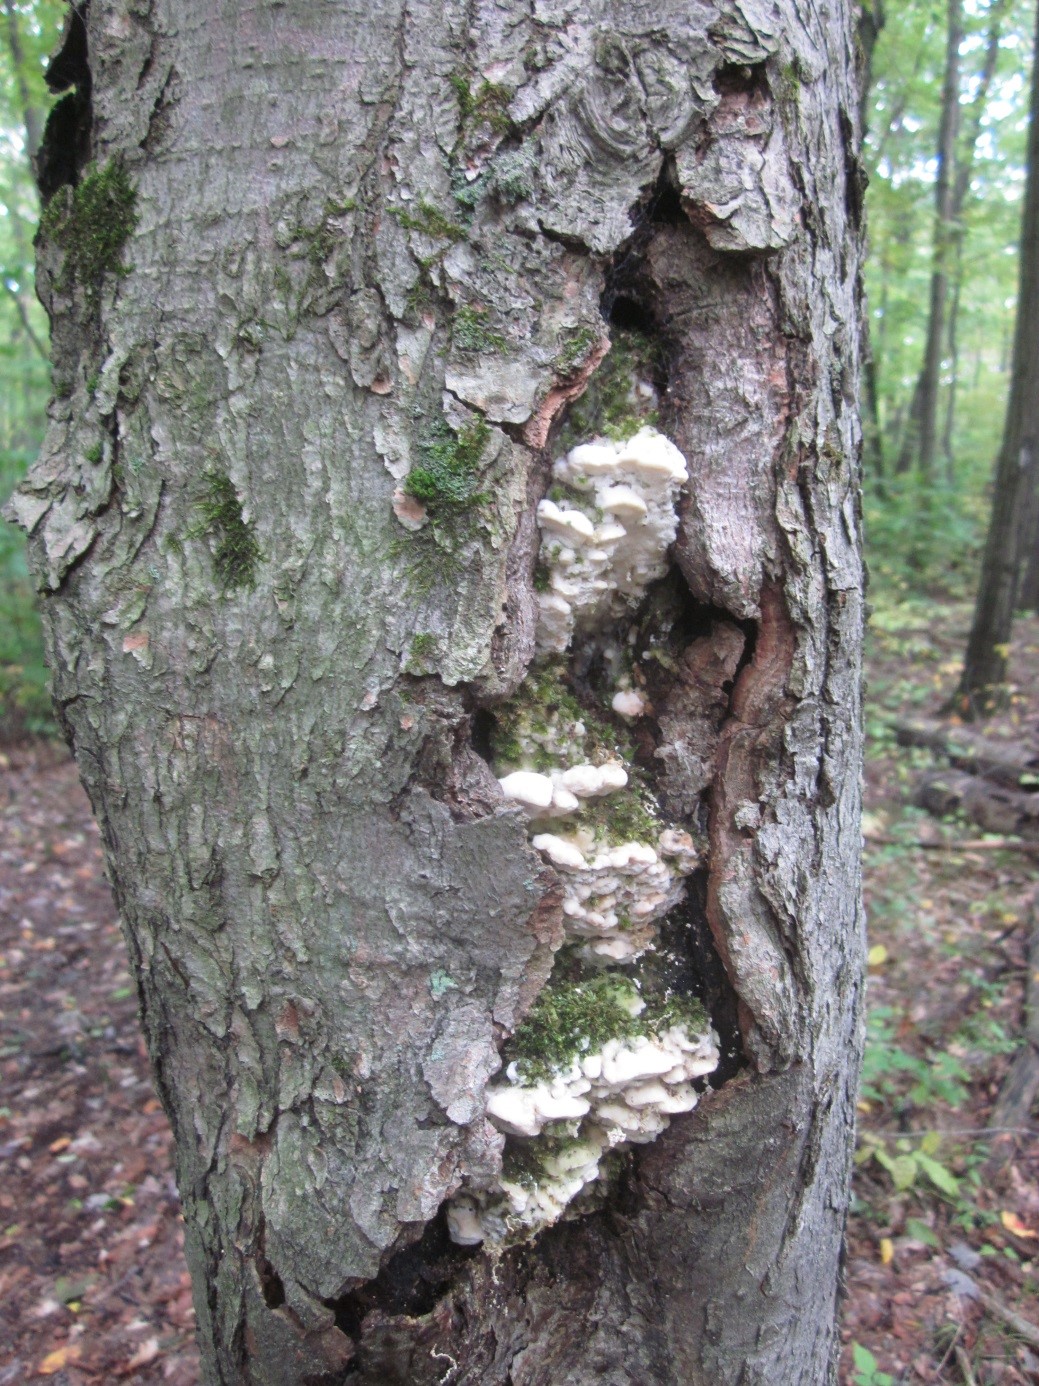 Photograph 3. Some wood decay species are common in forested habitats but are uncommon on urban species such as Oxyporus populinus shown here on sugar maple, or are less common on urban trees because of host range preferences.